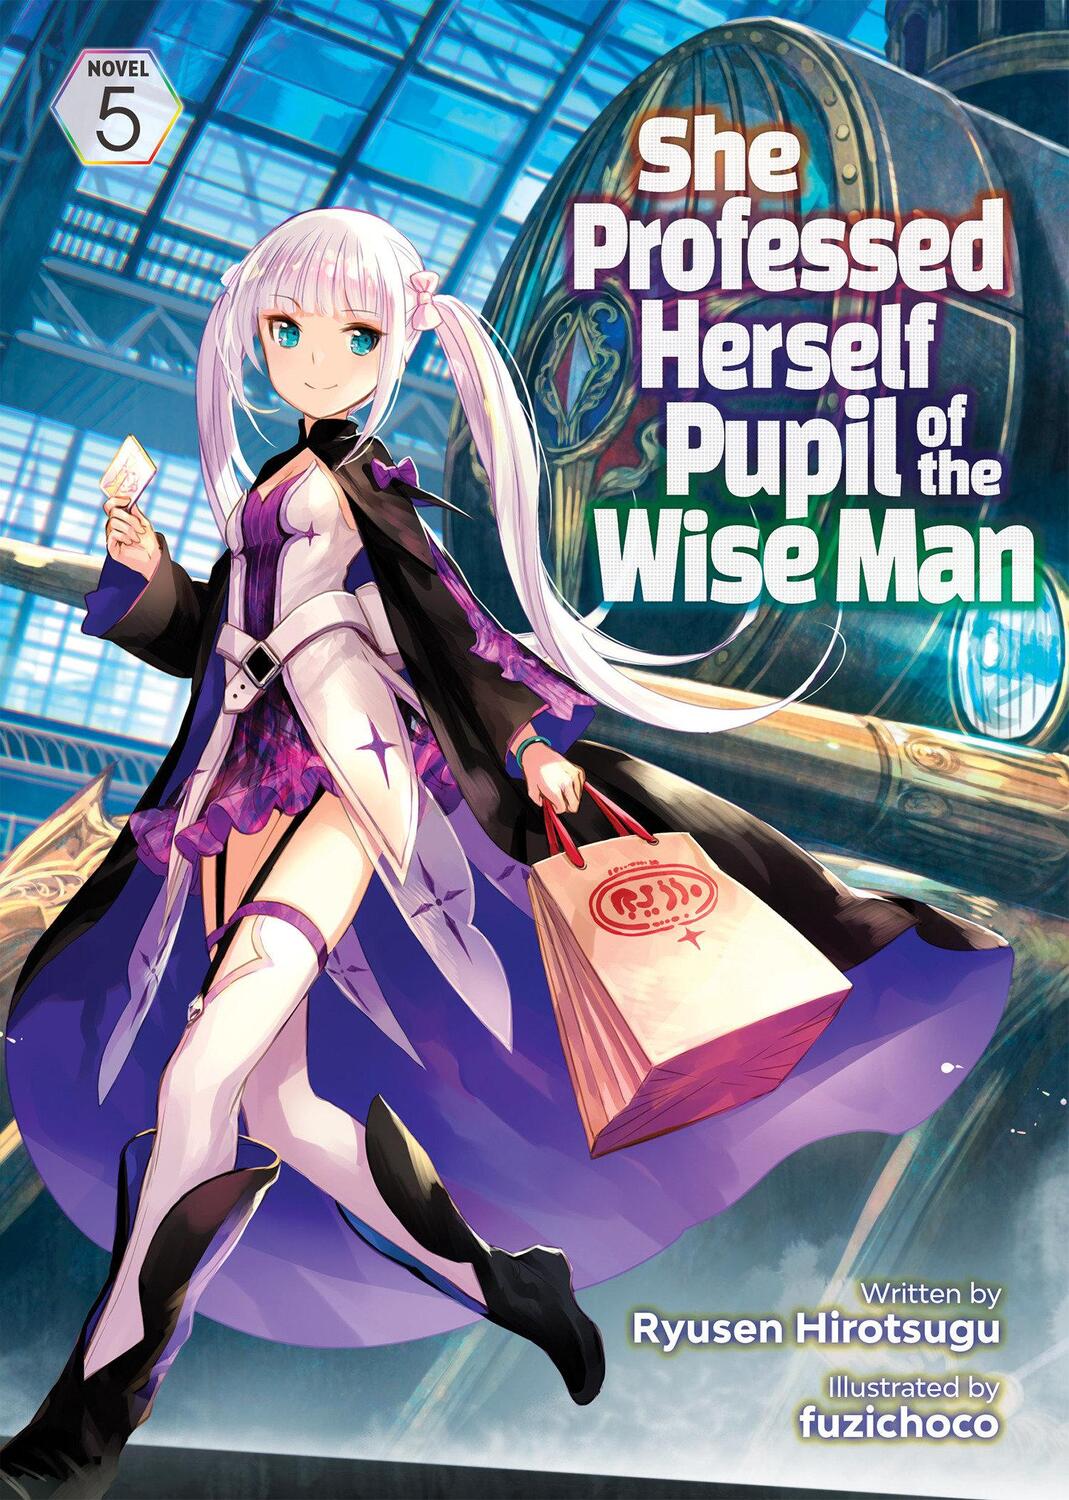 Cover: 9781638581376 | She Professed Herself Pupil of the Wise Man (Light Novel) Vol. 5